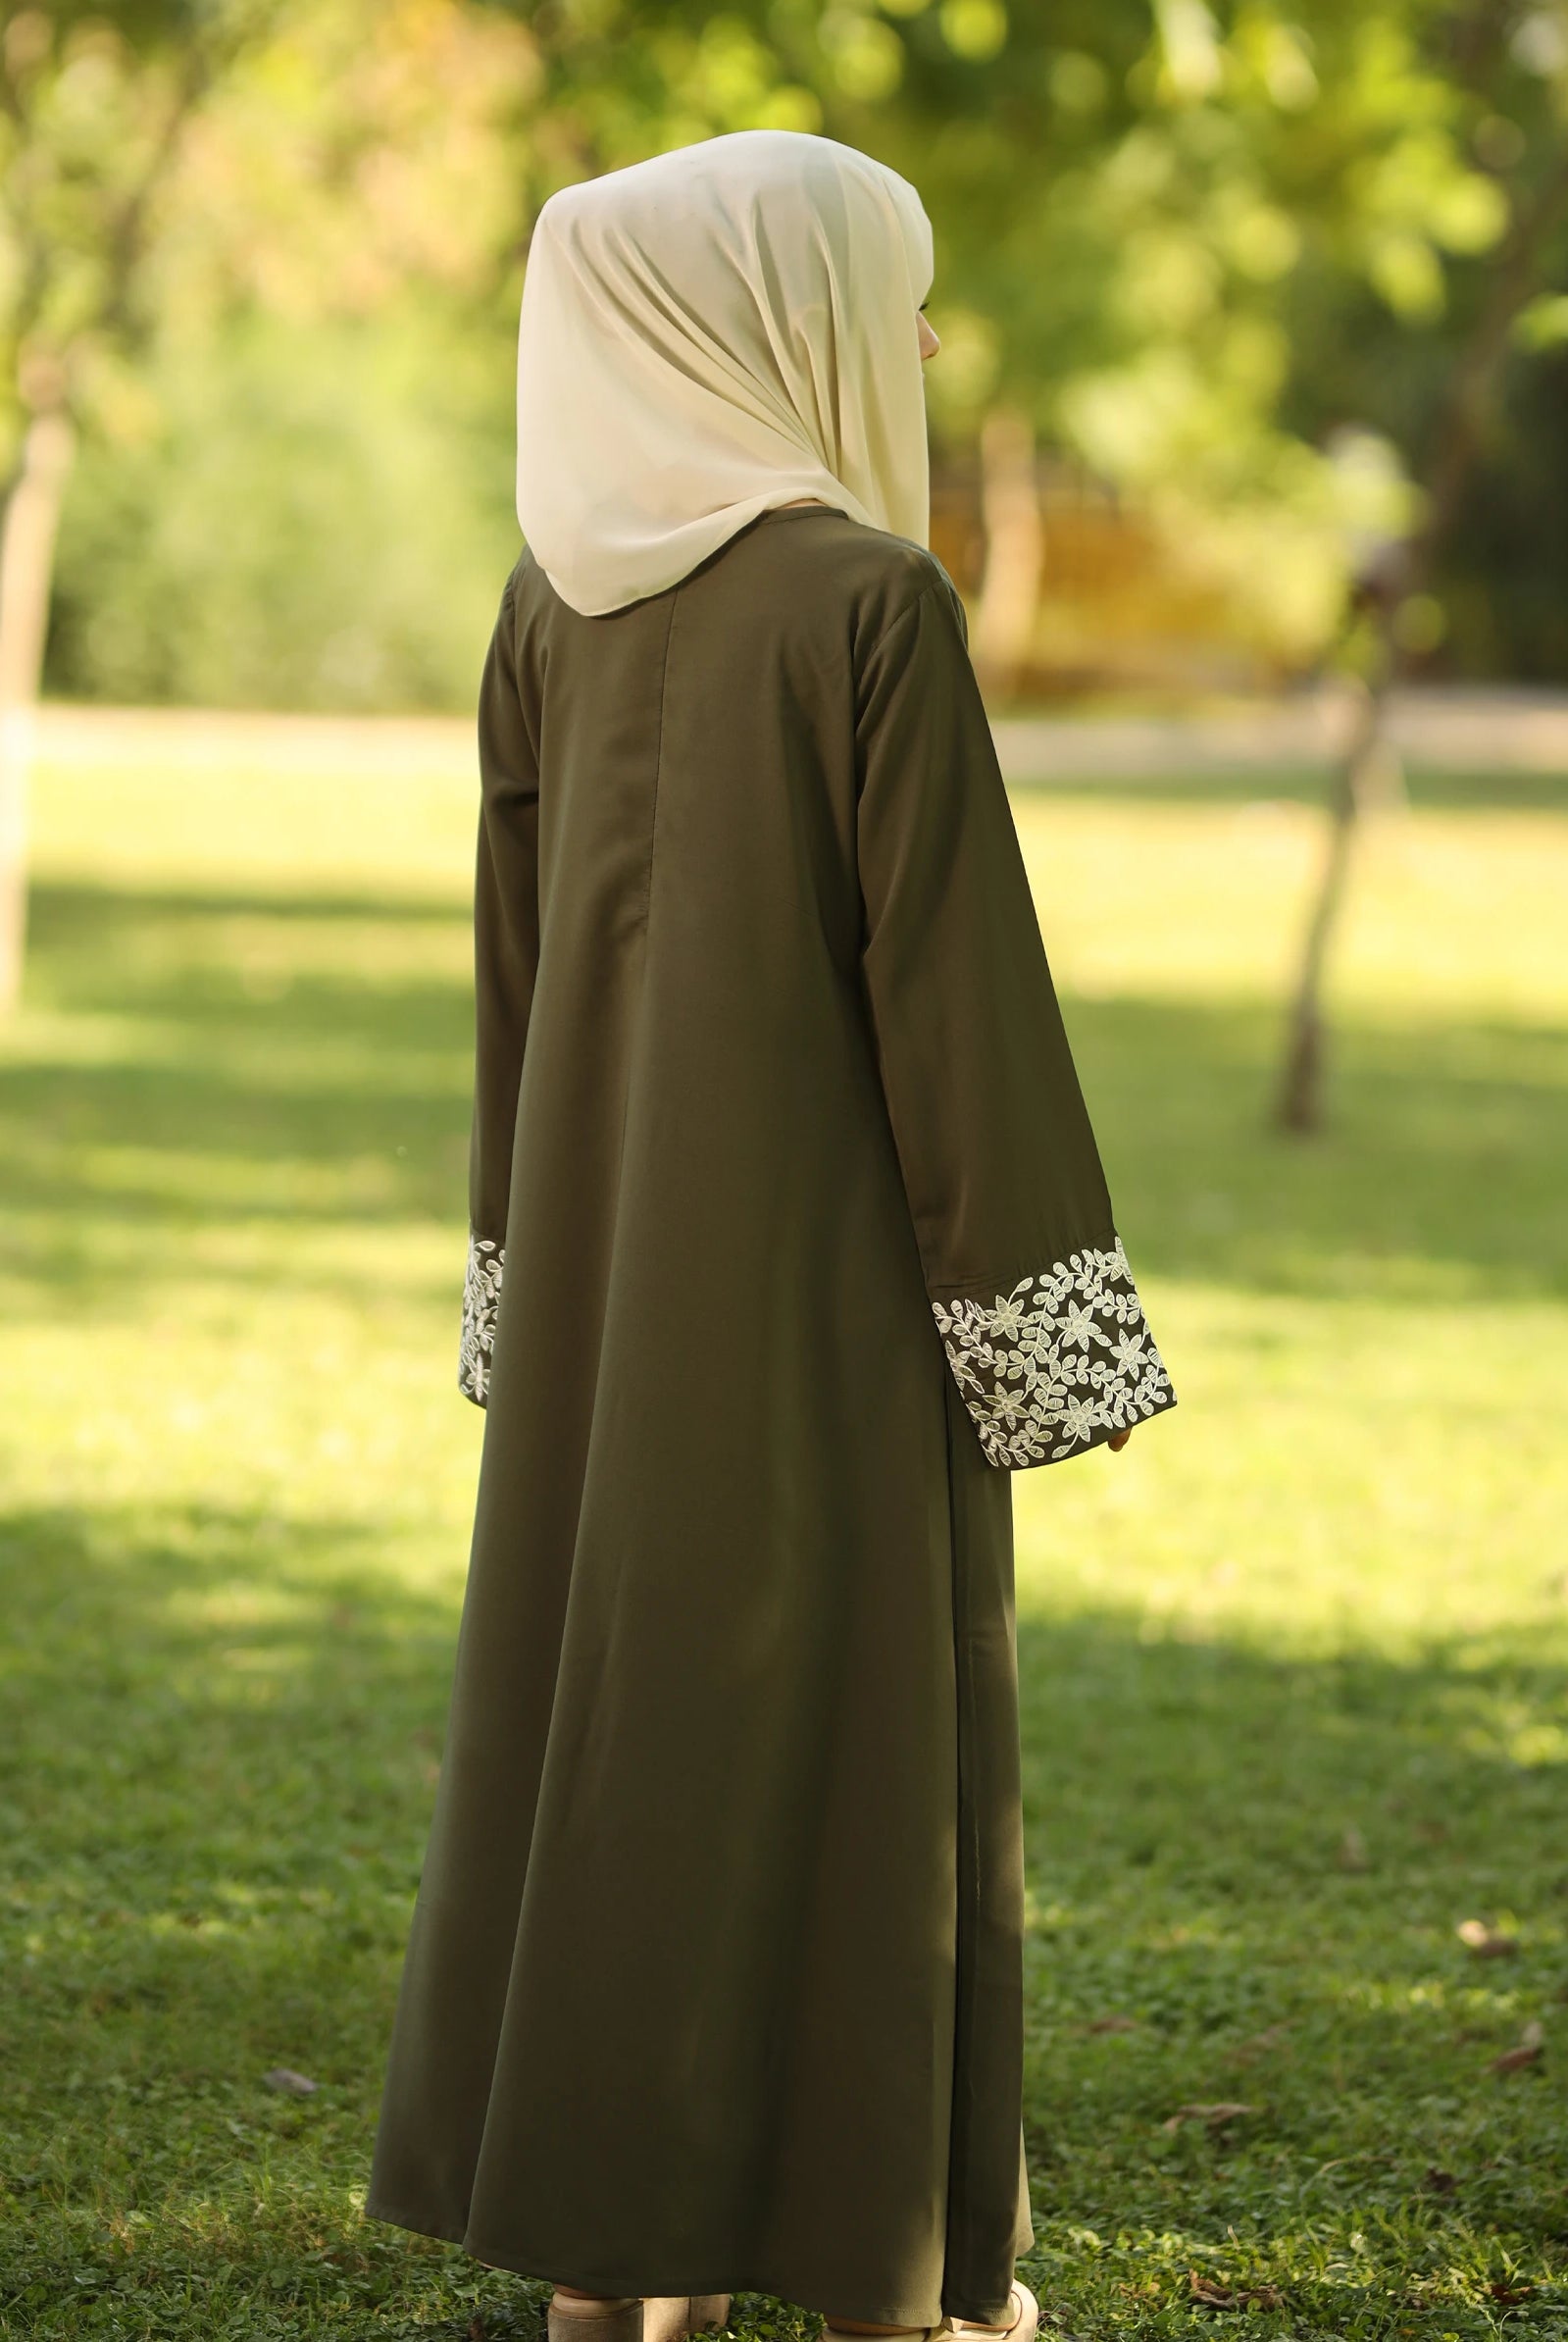 Modest Fashion & Clothing | Modest Wear | Modest Clothing for Women ...